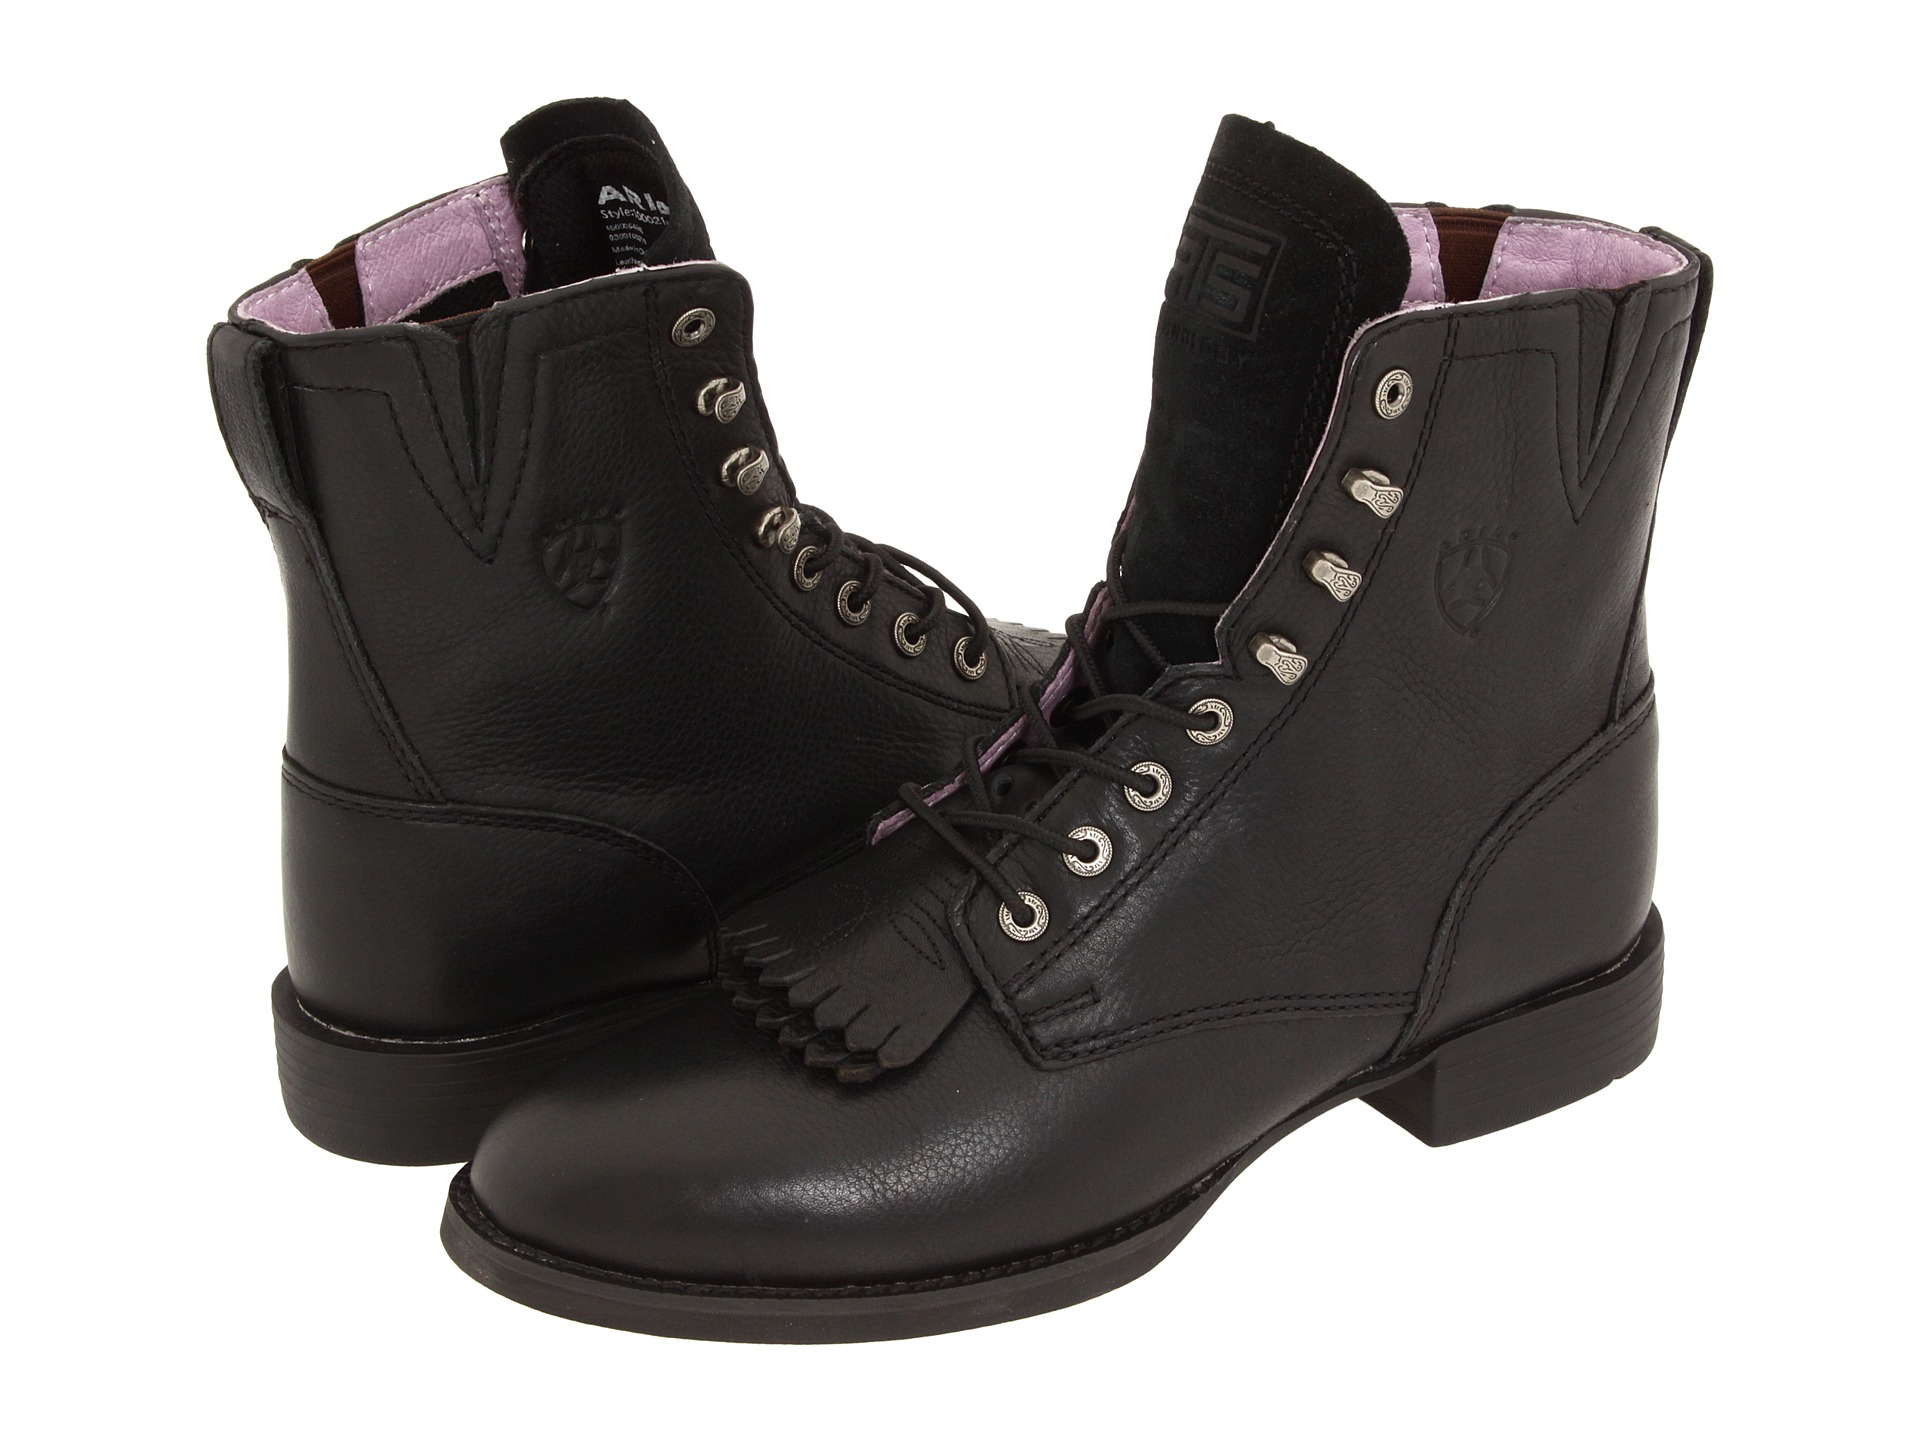 Ariat Heritage Lacer II at Zappos.com